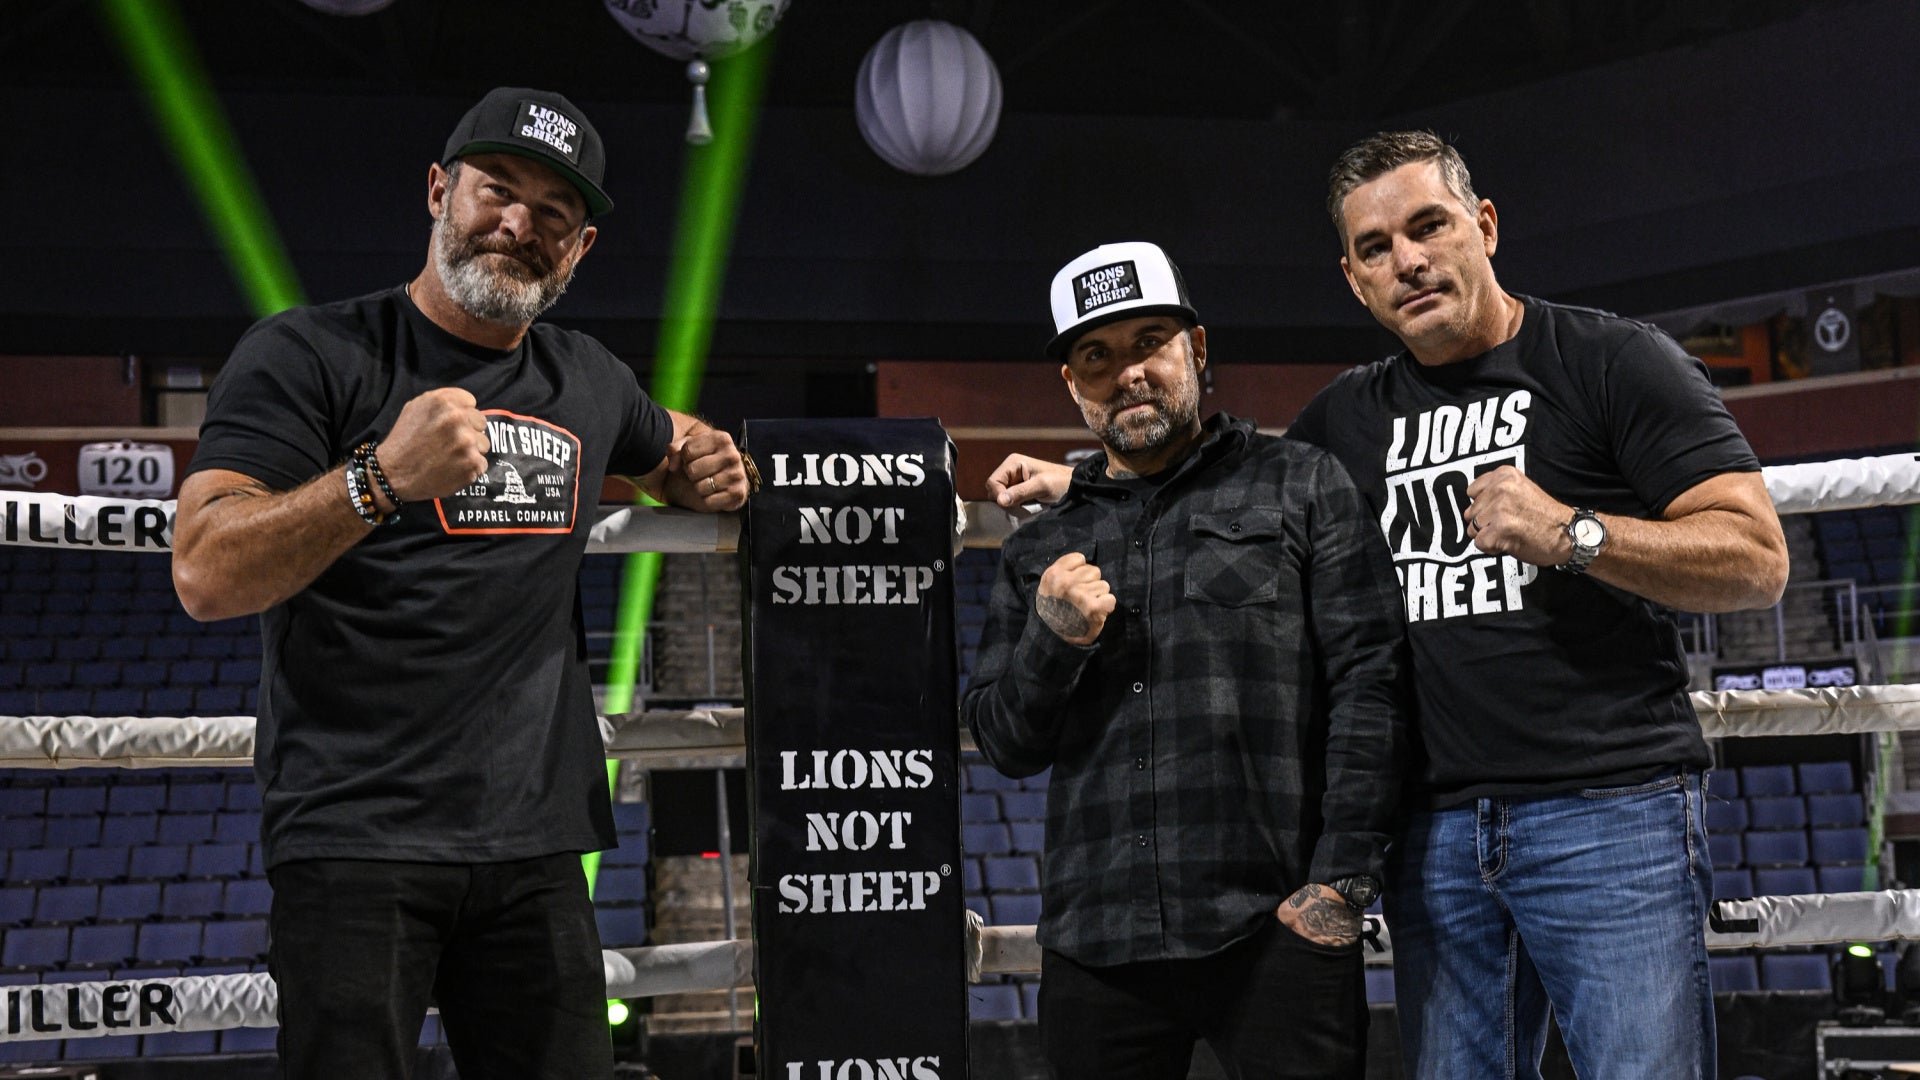 Bare Knuckle Fighting Championship introduces LIONS NOT SHEEP as official apparel partner